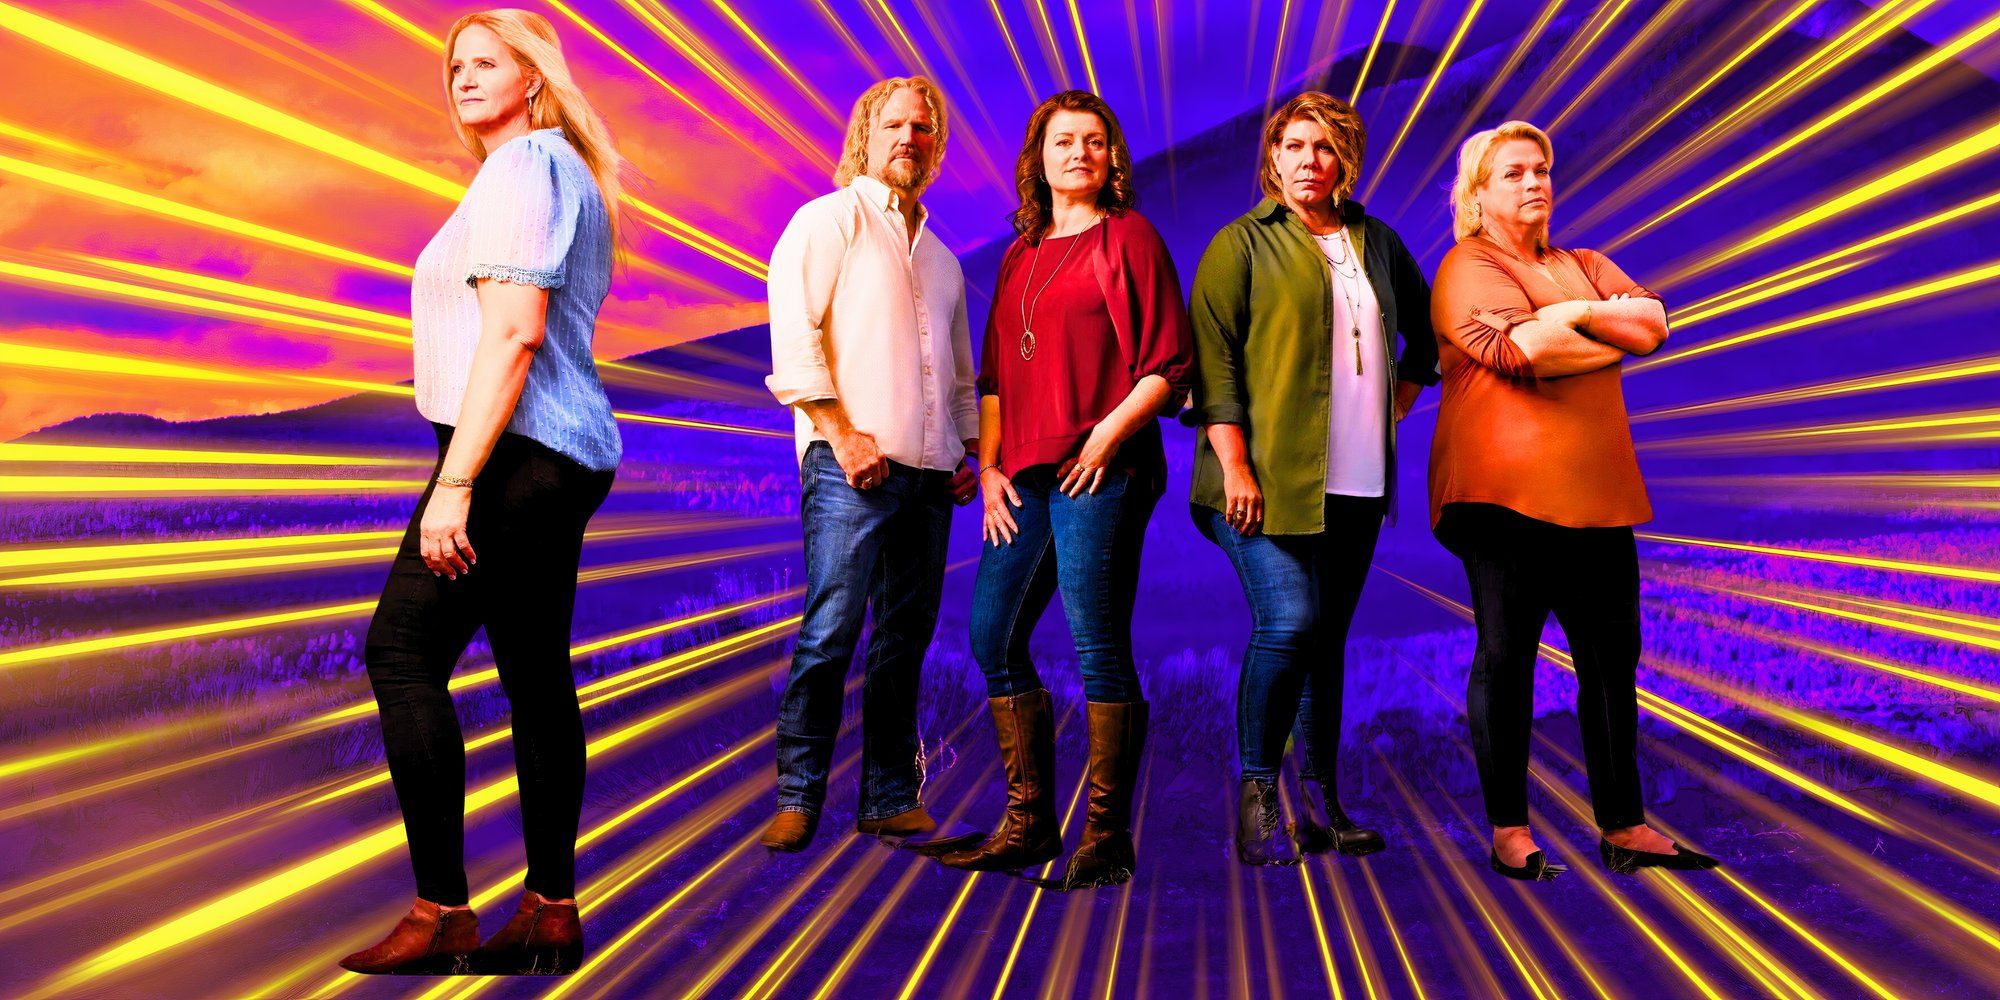 sister wives montage of cast with purple and yellow background